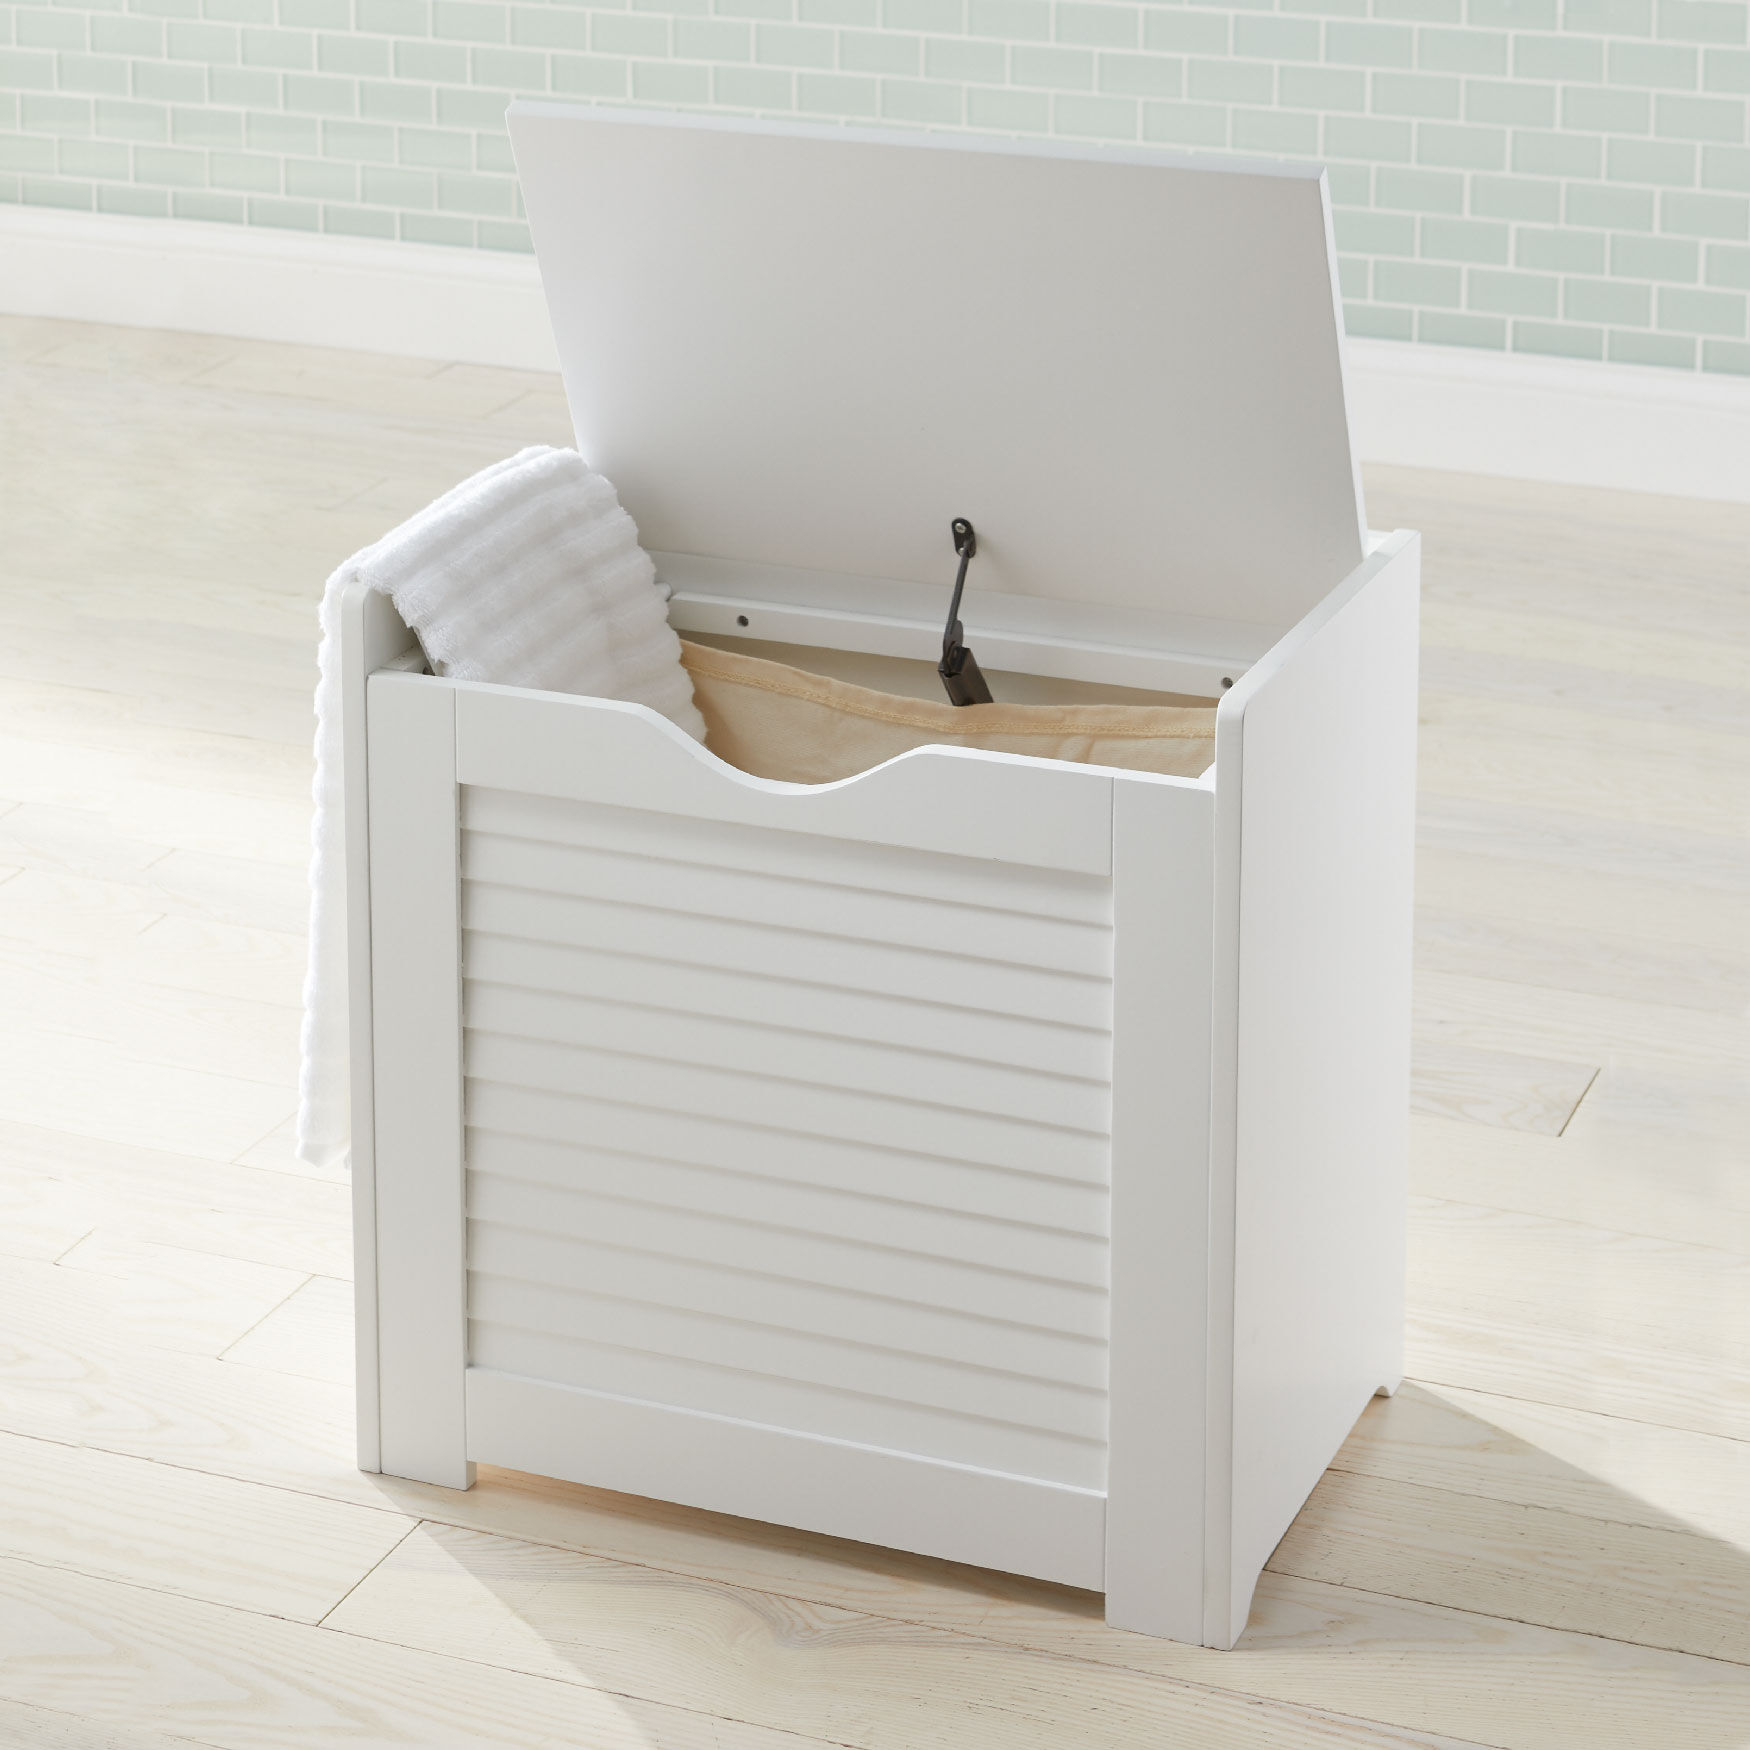 Home Source White Bathroom Storage Ottoman Hamper Wooden Floor Cabinet Lift Up Lid Colonial 